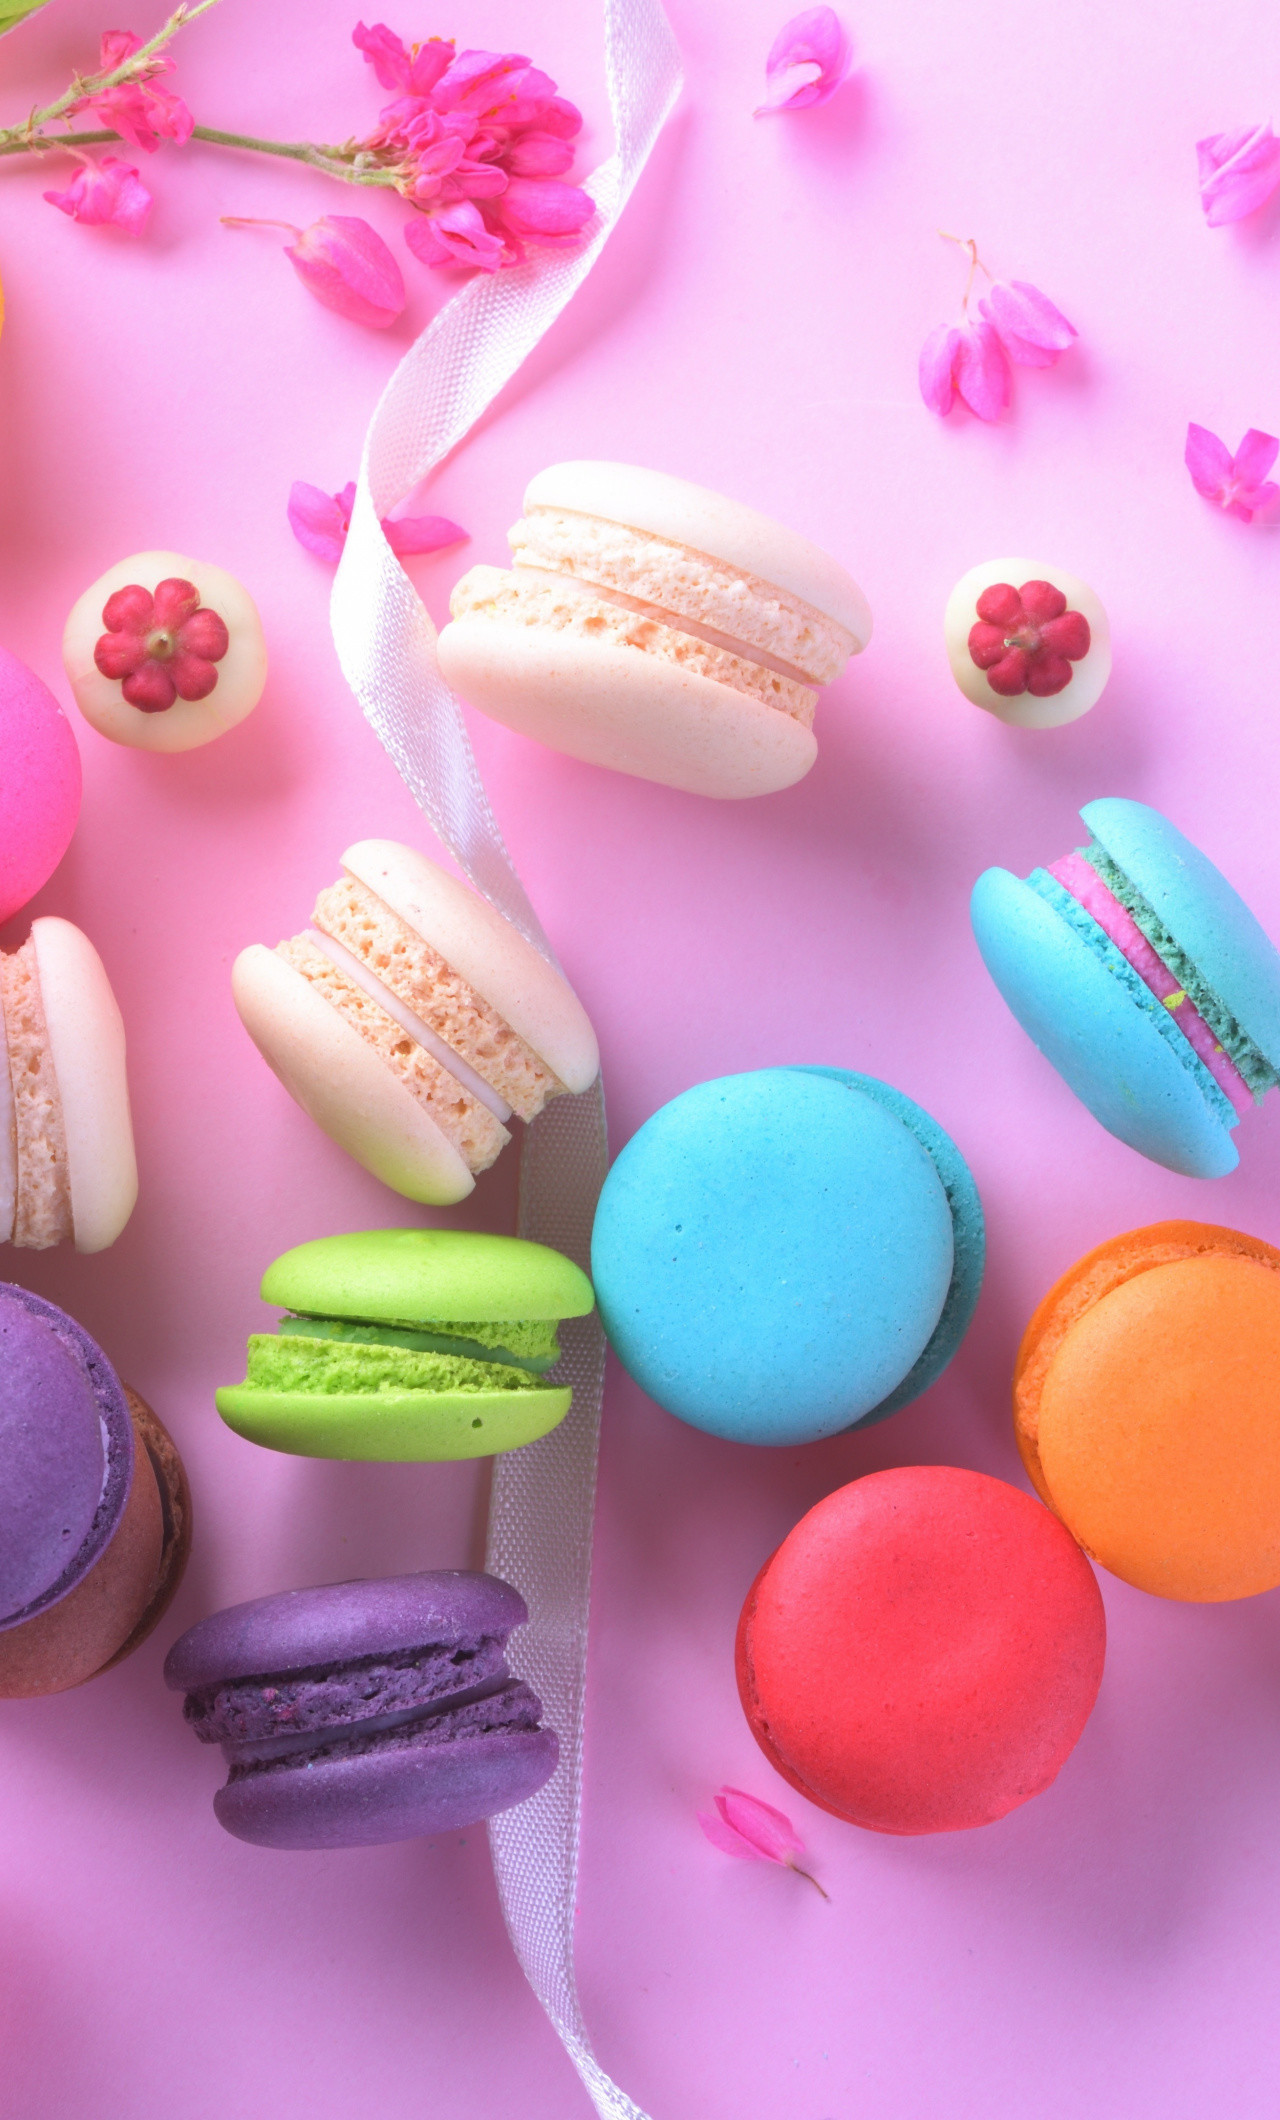 Macaron Wallpapers for iPhone (84+ images)